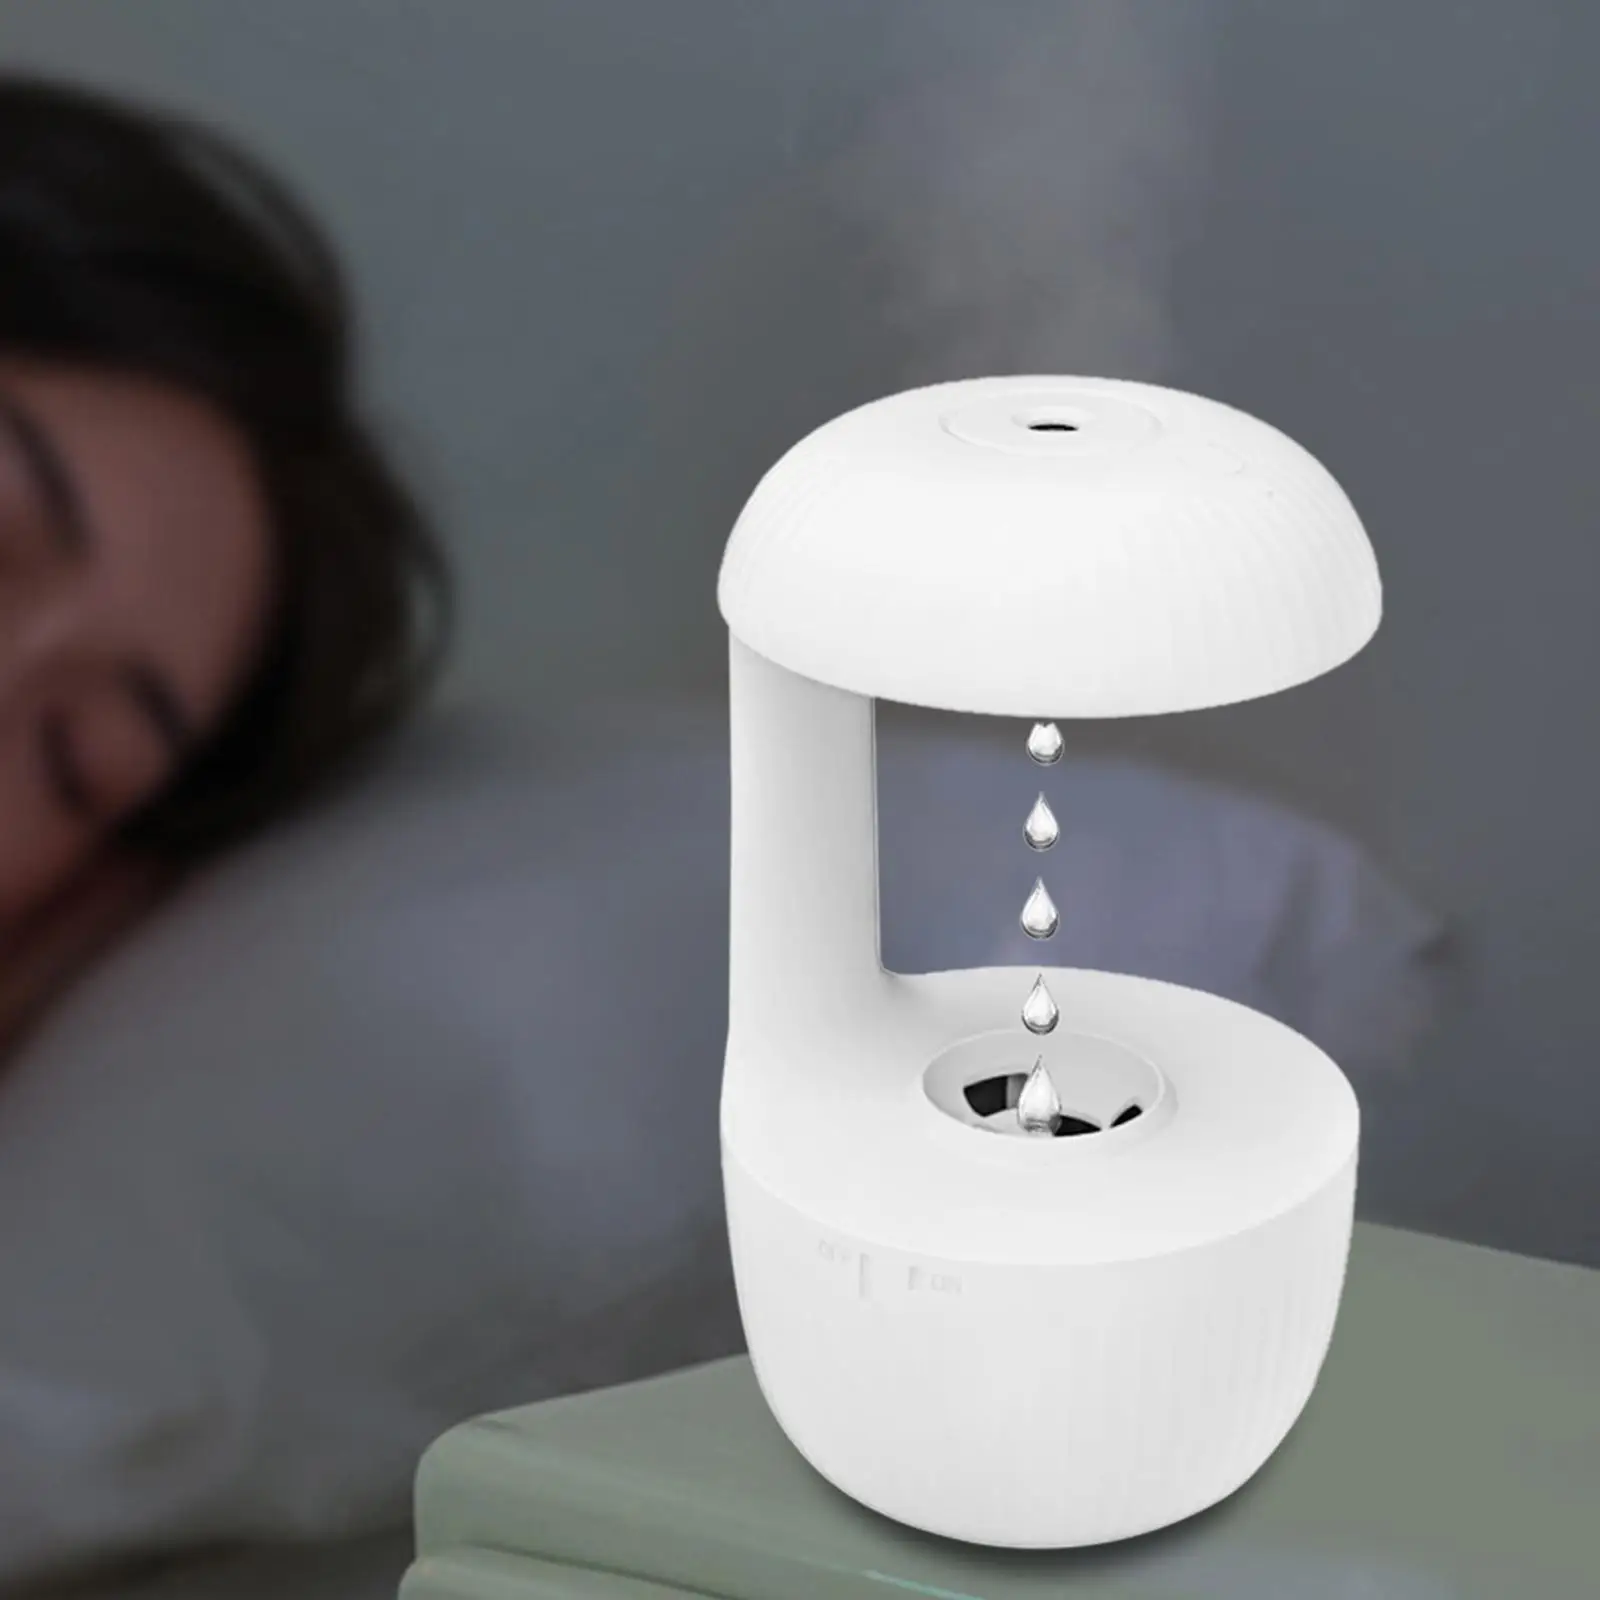 Desktop Air Humidifier Levitating Water Drops Auto Shut Off USB Rechargeable Low Noise Personal Humidifier for Office Nursery